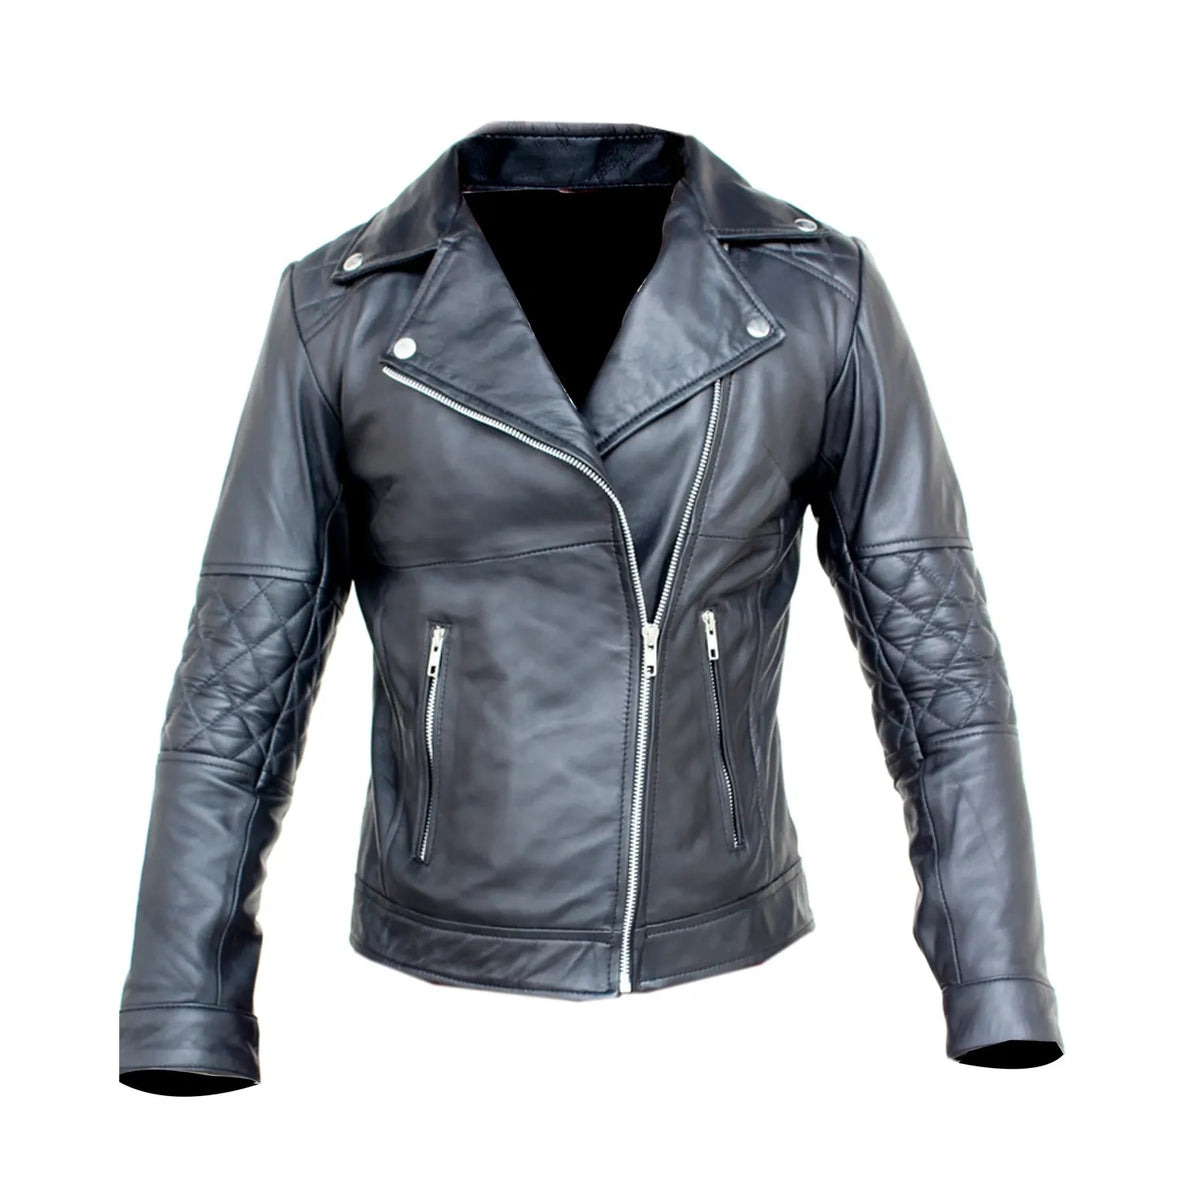 Women's Zip-Up Real Black Leather Quilted Diamond Motorcycle Jacket